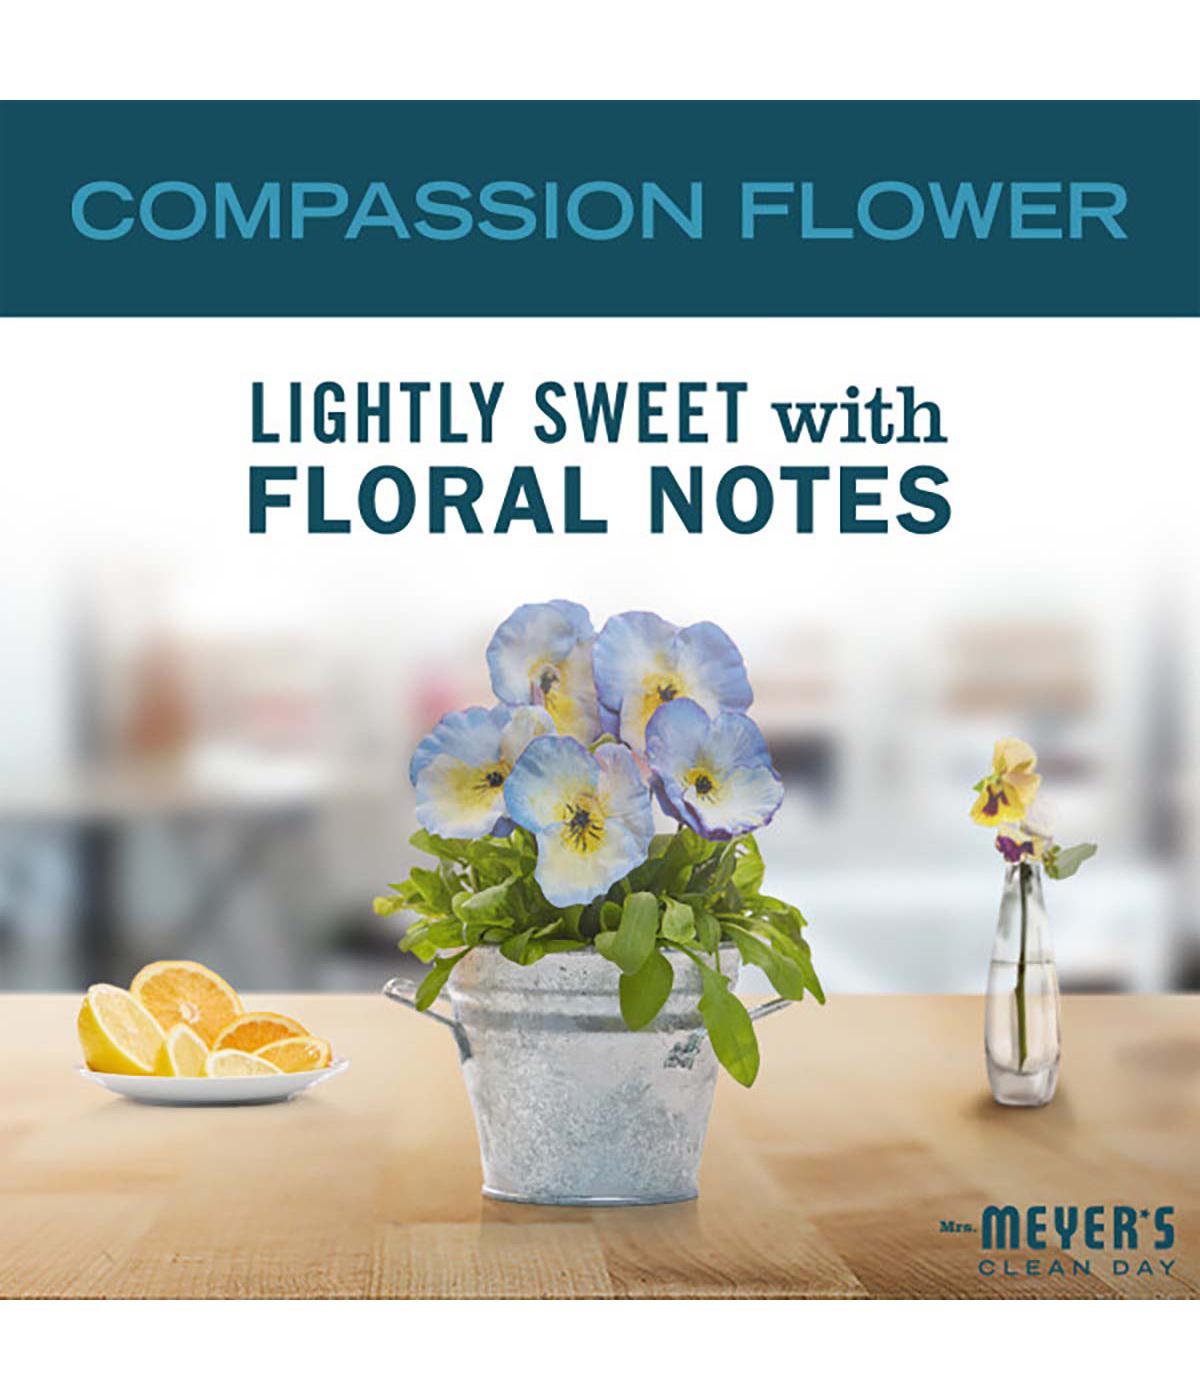 Mrs. Meyer's Clean Day Compassion Flower Scented Soy Candle; image 2 of 3